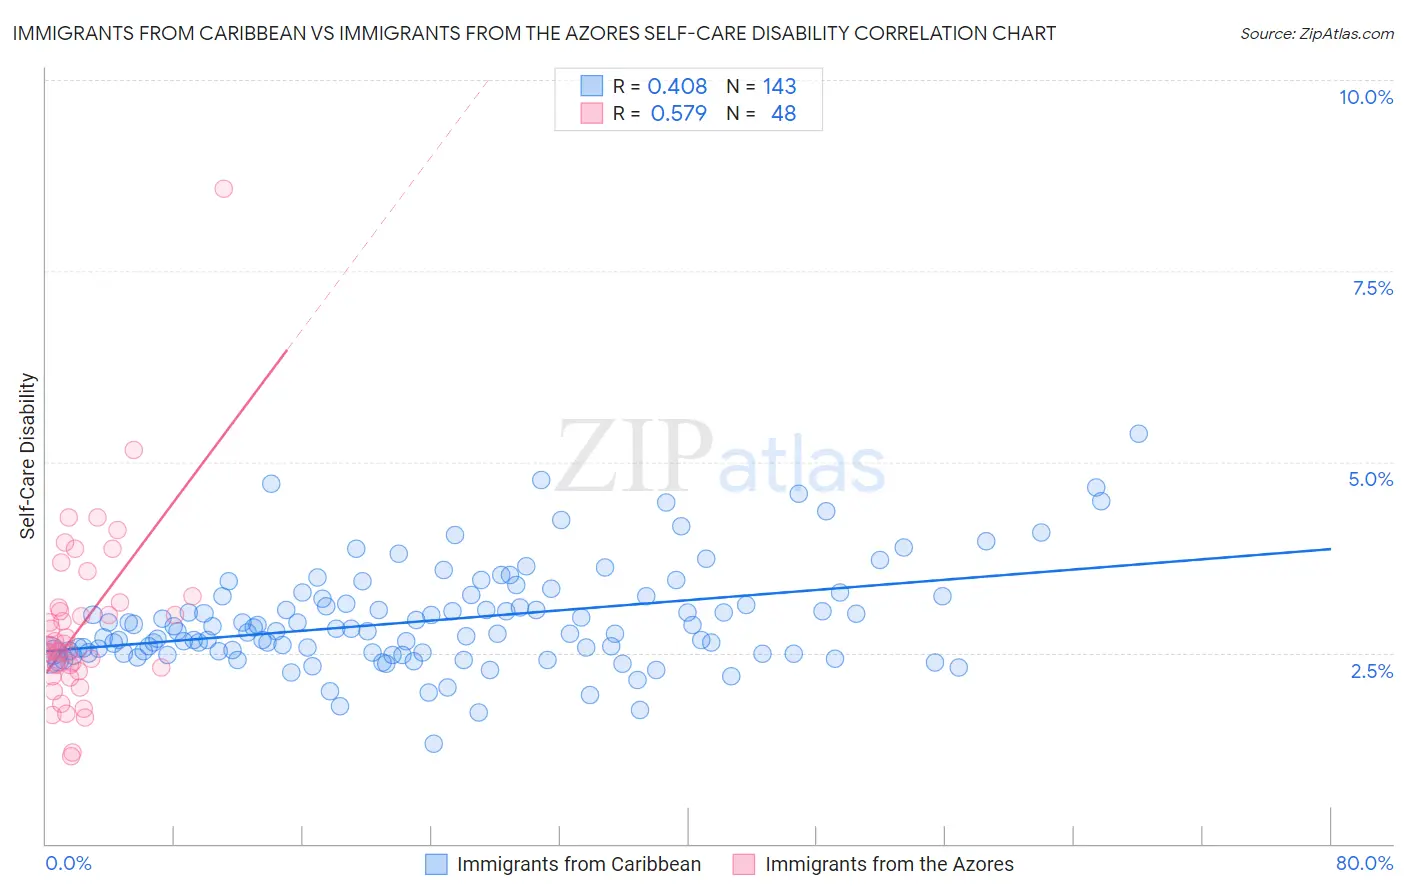 Immigrants from Caribbean vs Immigrants from the Azores Self-Care Disability